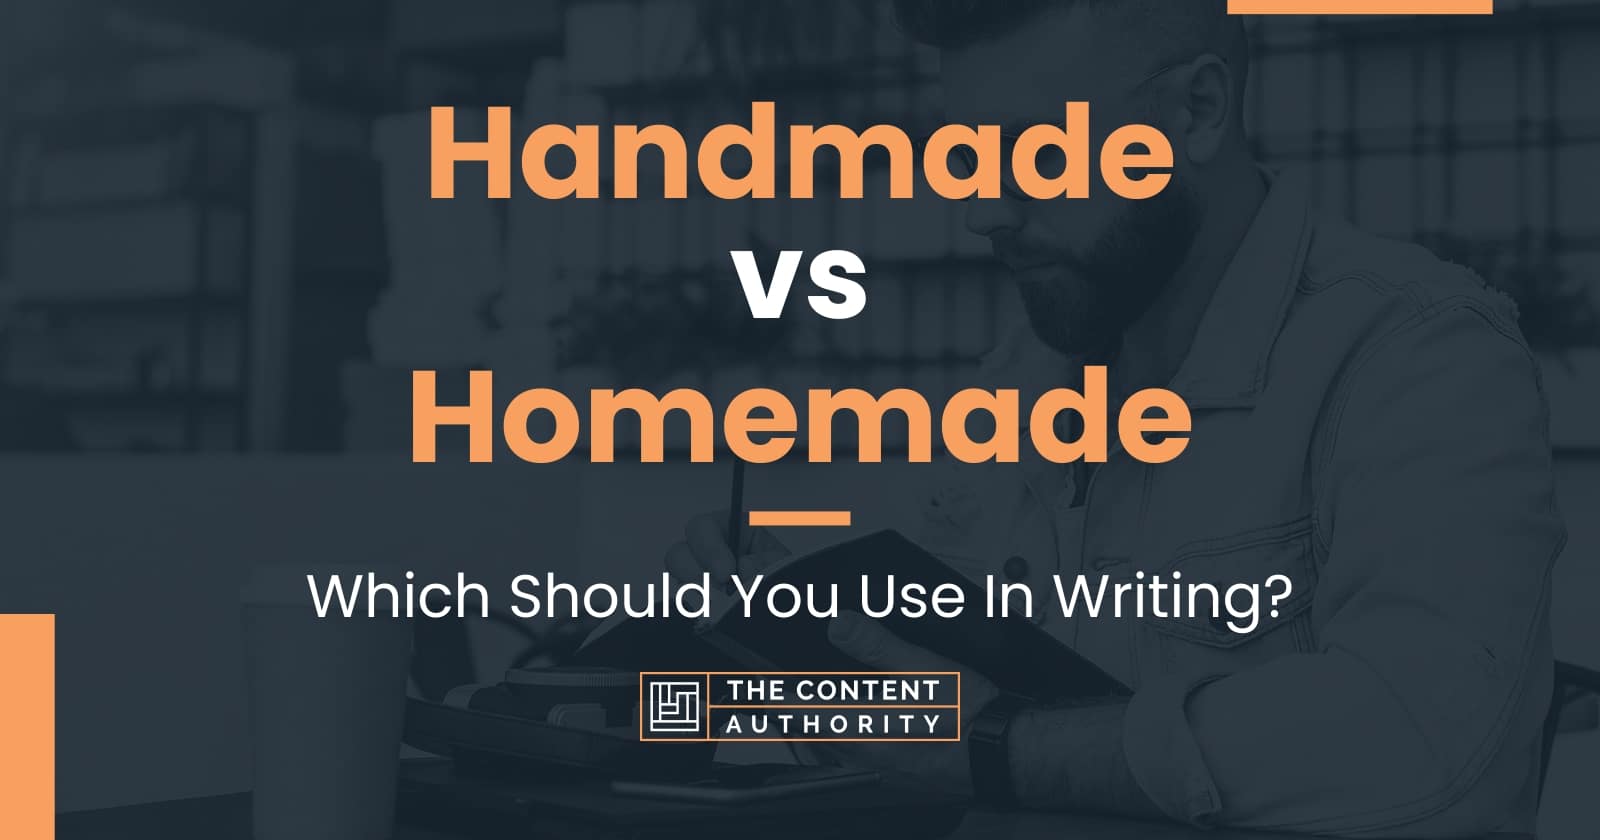 Handmade vs Homemade Which Should You Use In Writing?